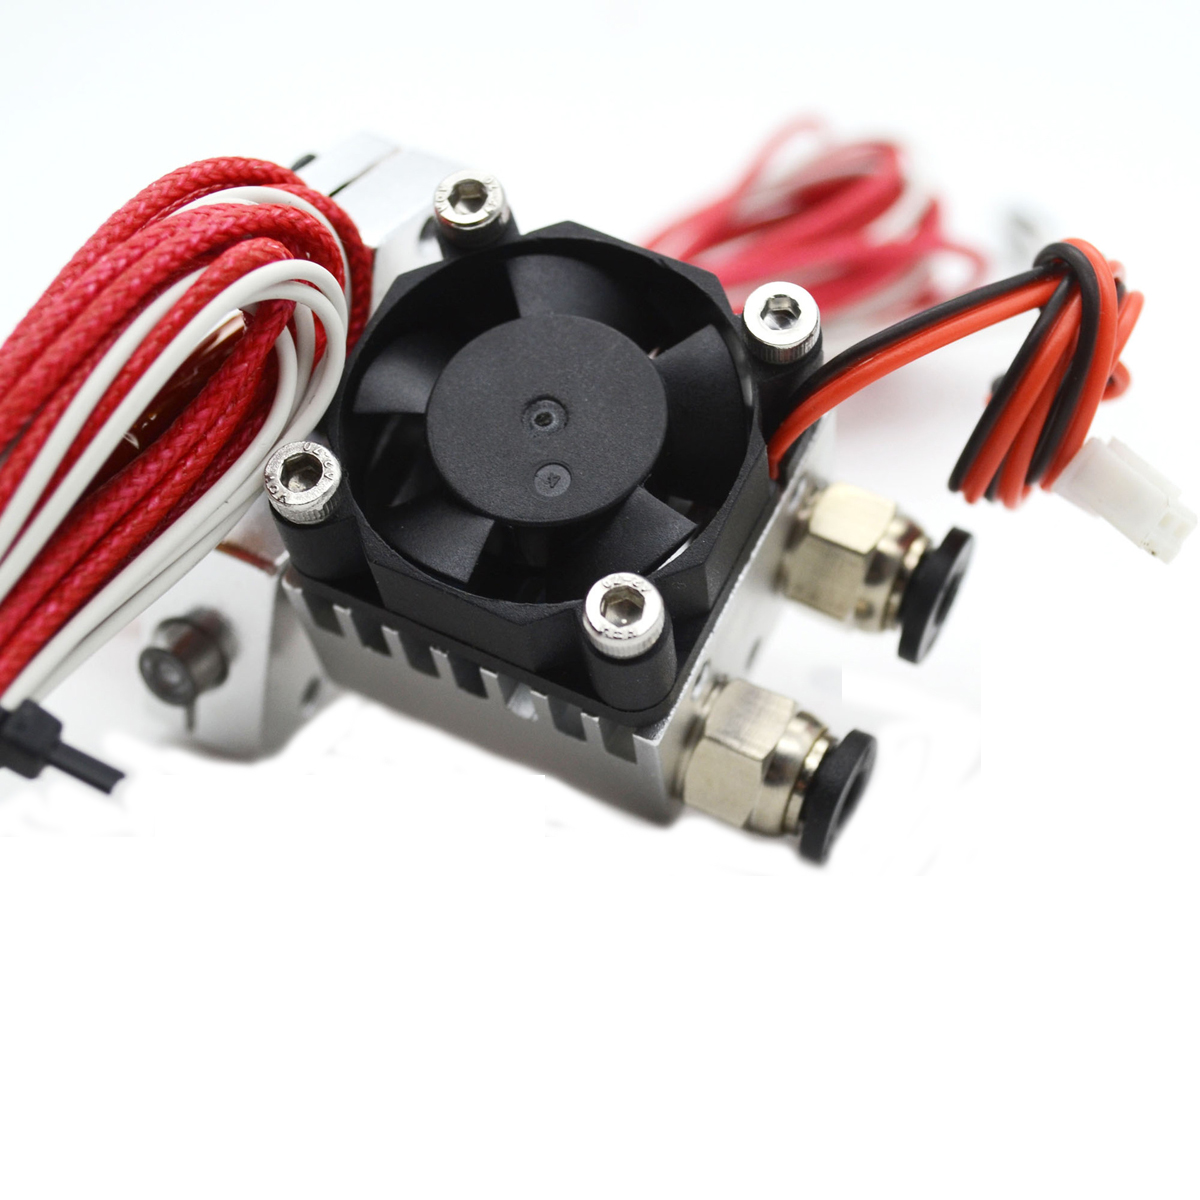 1.75mm/3.0mm Fialment 0.4mm Nozzle Upgraded Dual Head Extruder Kit for 3D Printer 14